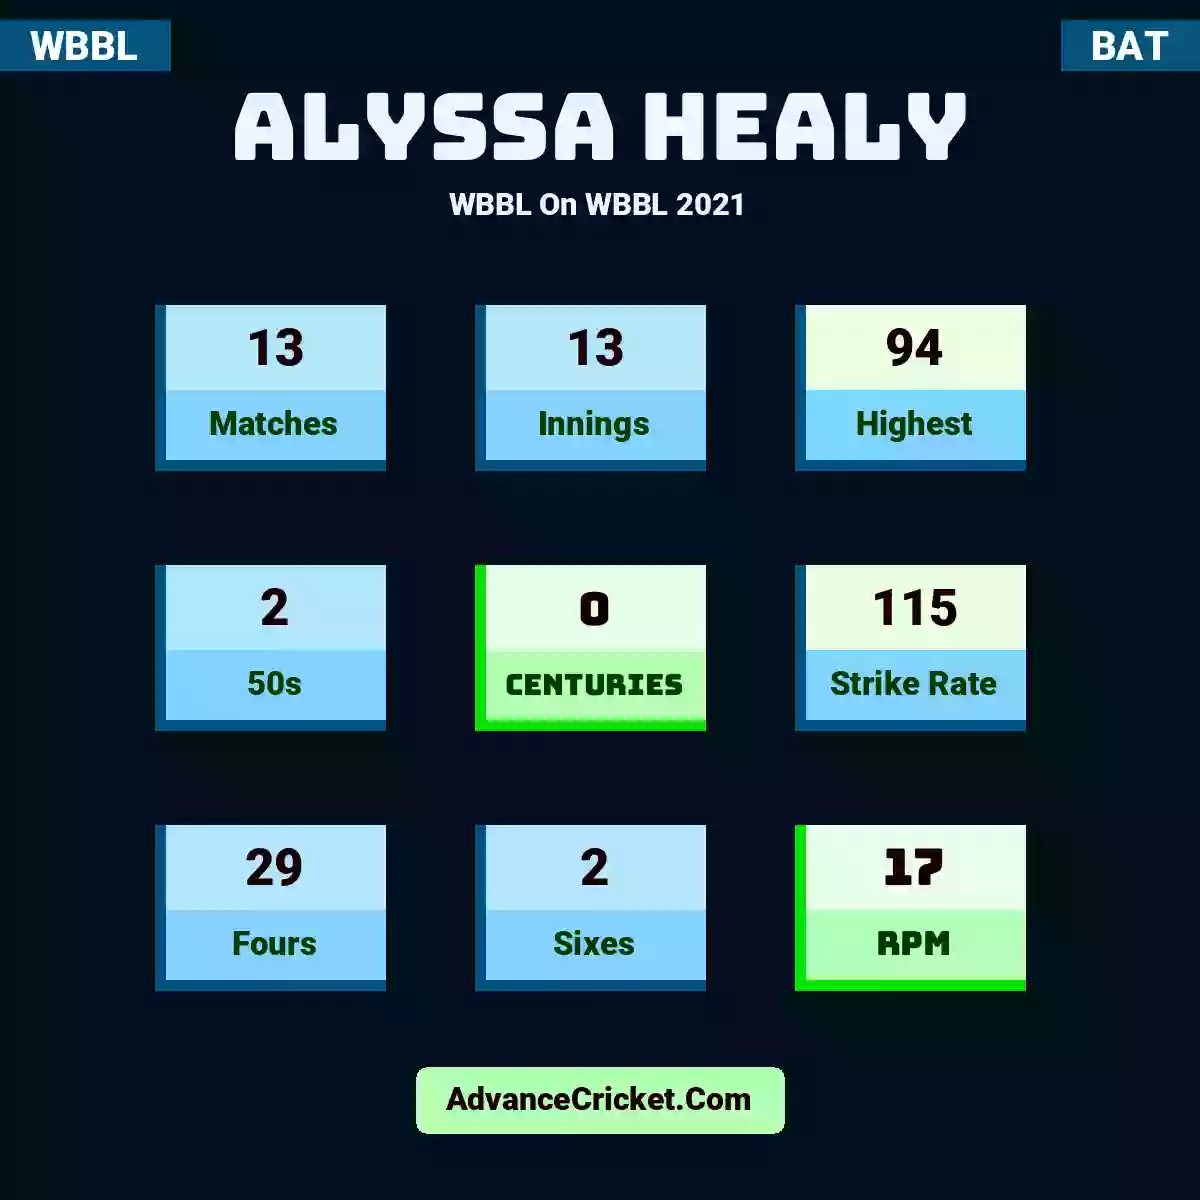 Alyssa Healy WBBL  On WBBL 2021, Alyssa Healy played 13 matches, scored 94 runs as highest, 2 half-centuries, and 0 centuries, with a strike rate of 115. A.Healy hit 29 fours and 2 sixes, with an RPM of 17.